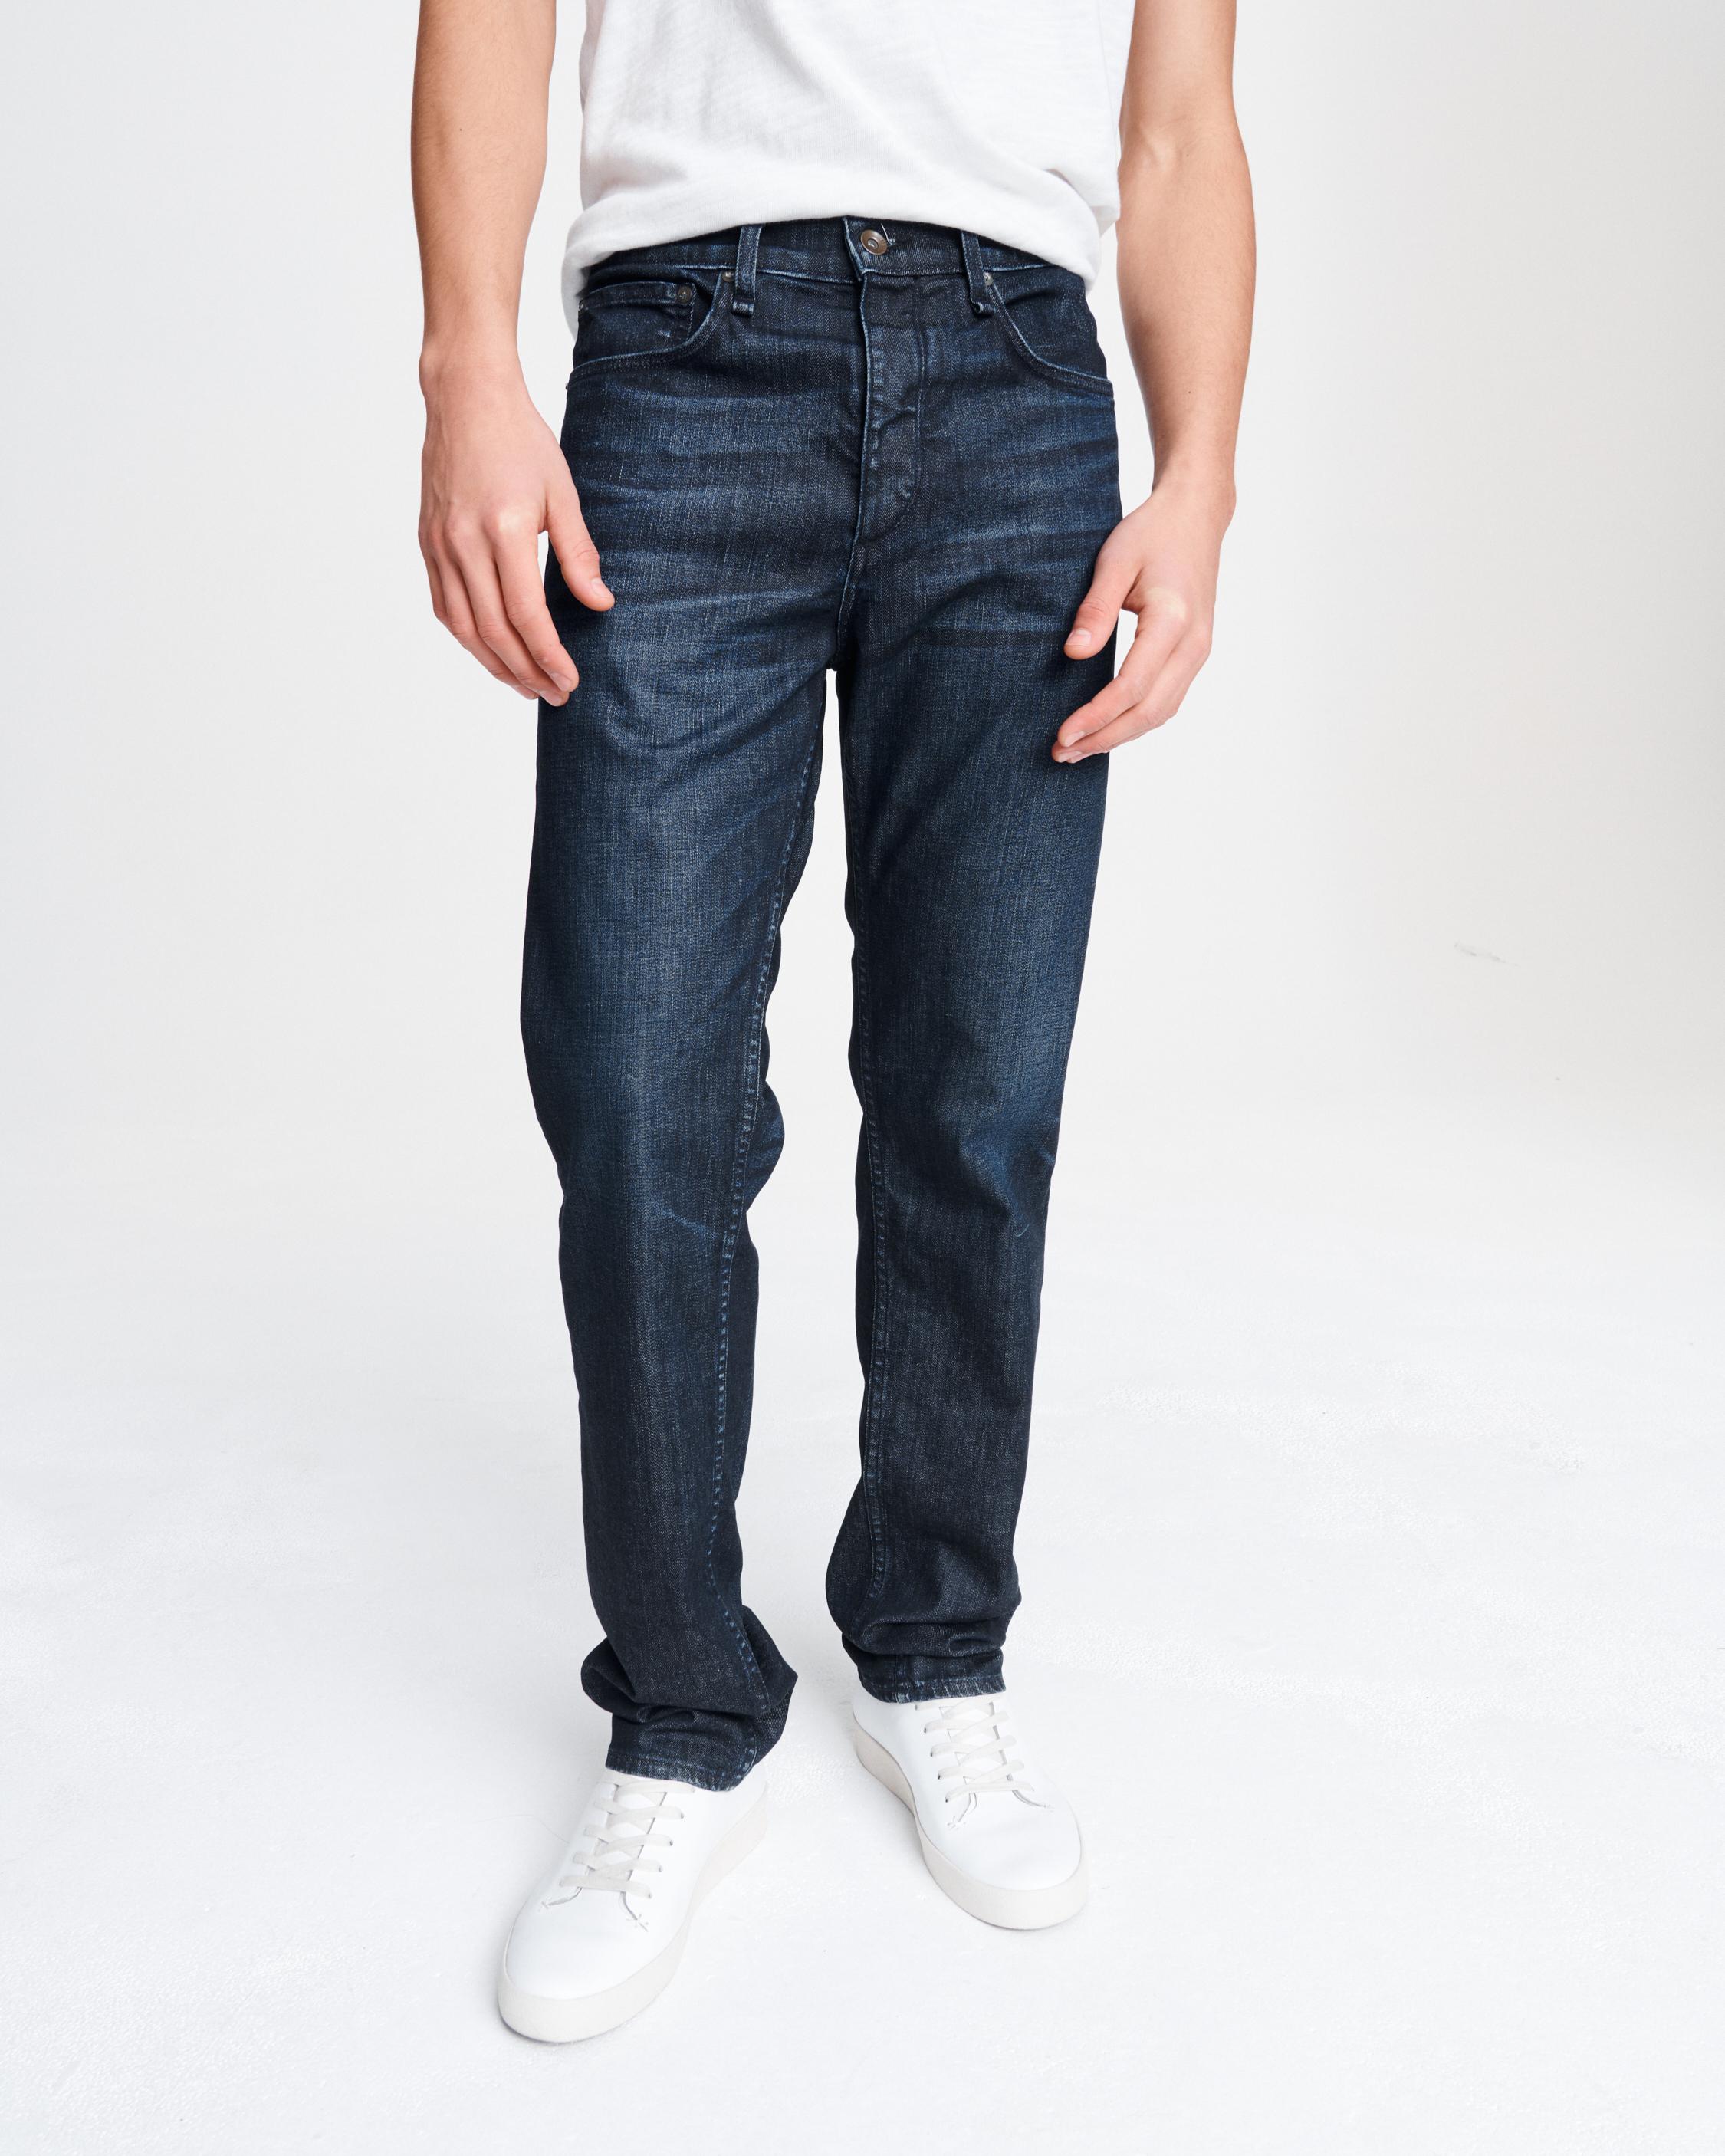 rag and bone fit 3 jeans